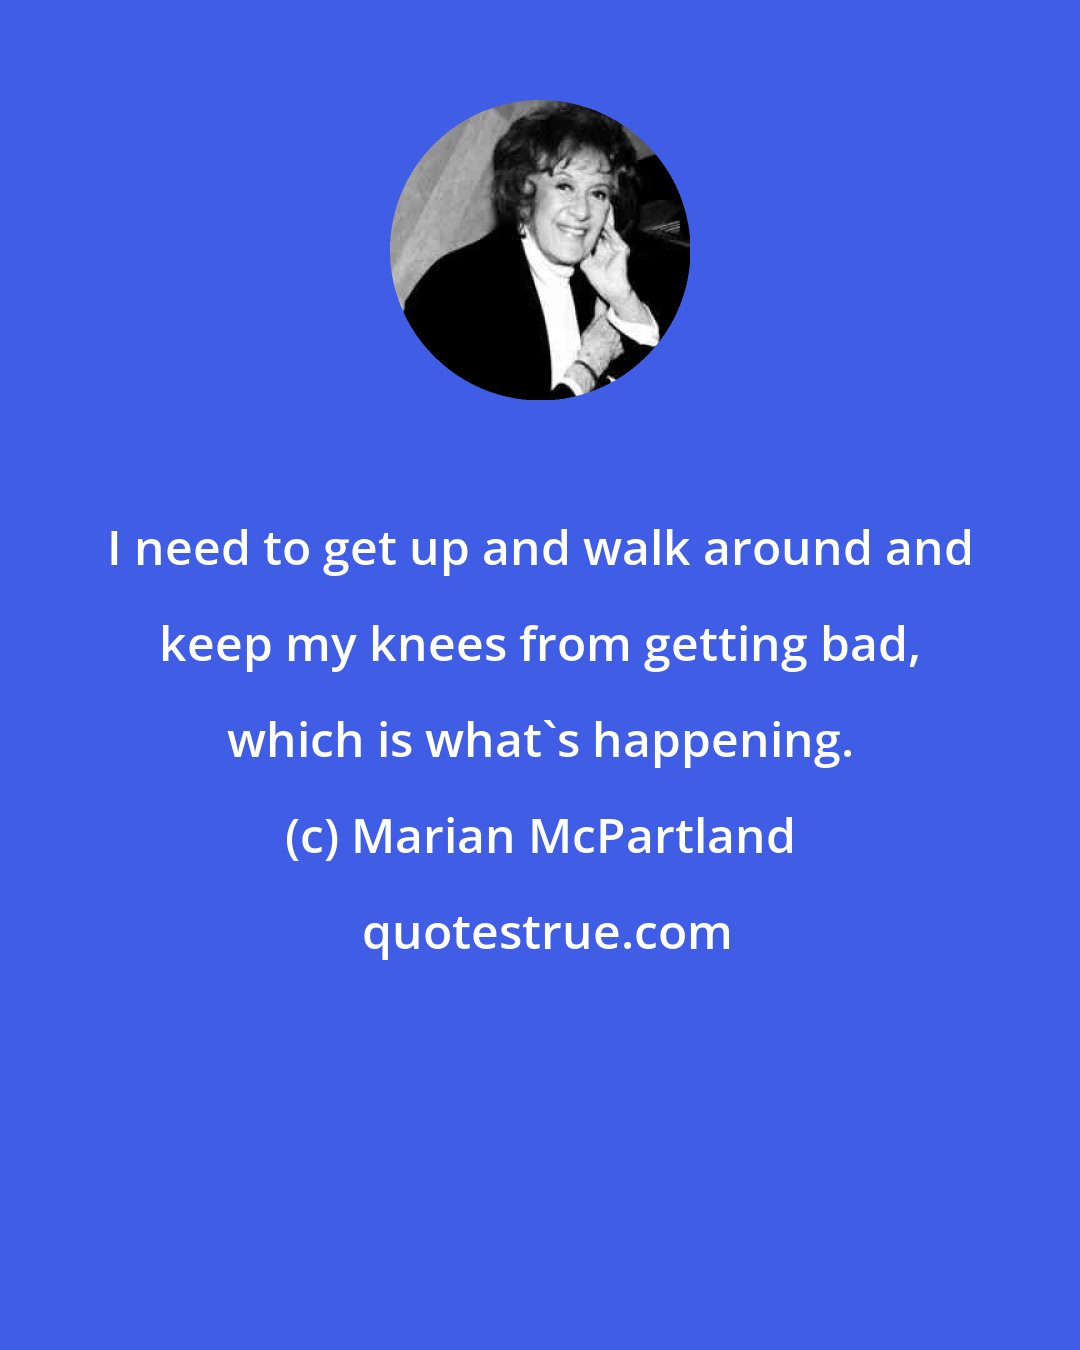 Marian McPartland: I need to get up and walk around and keep my knees from getting bad, which is what's happening.